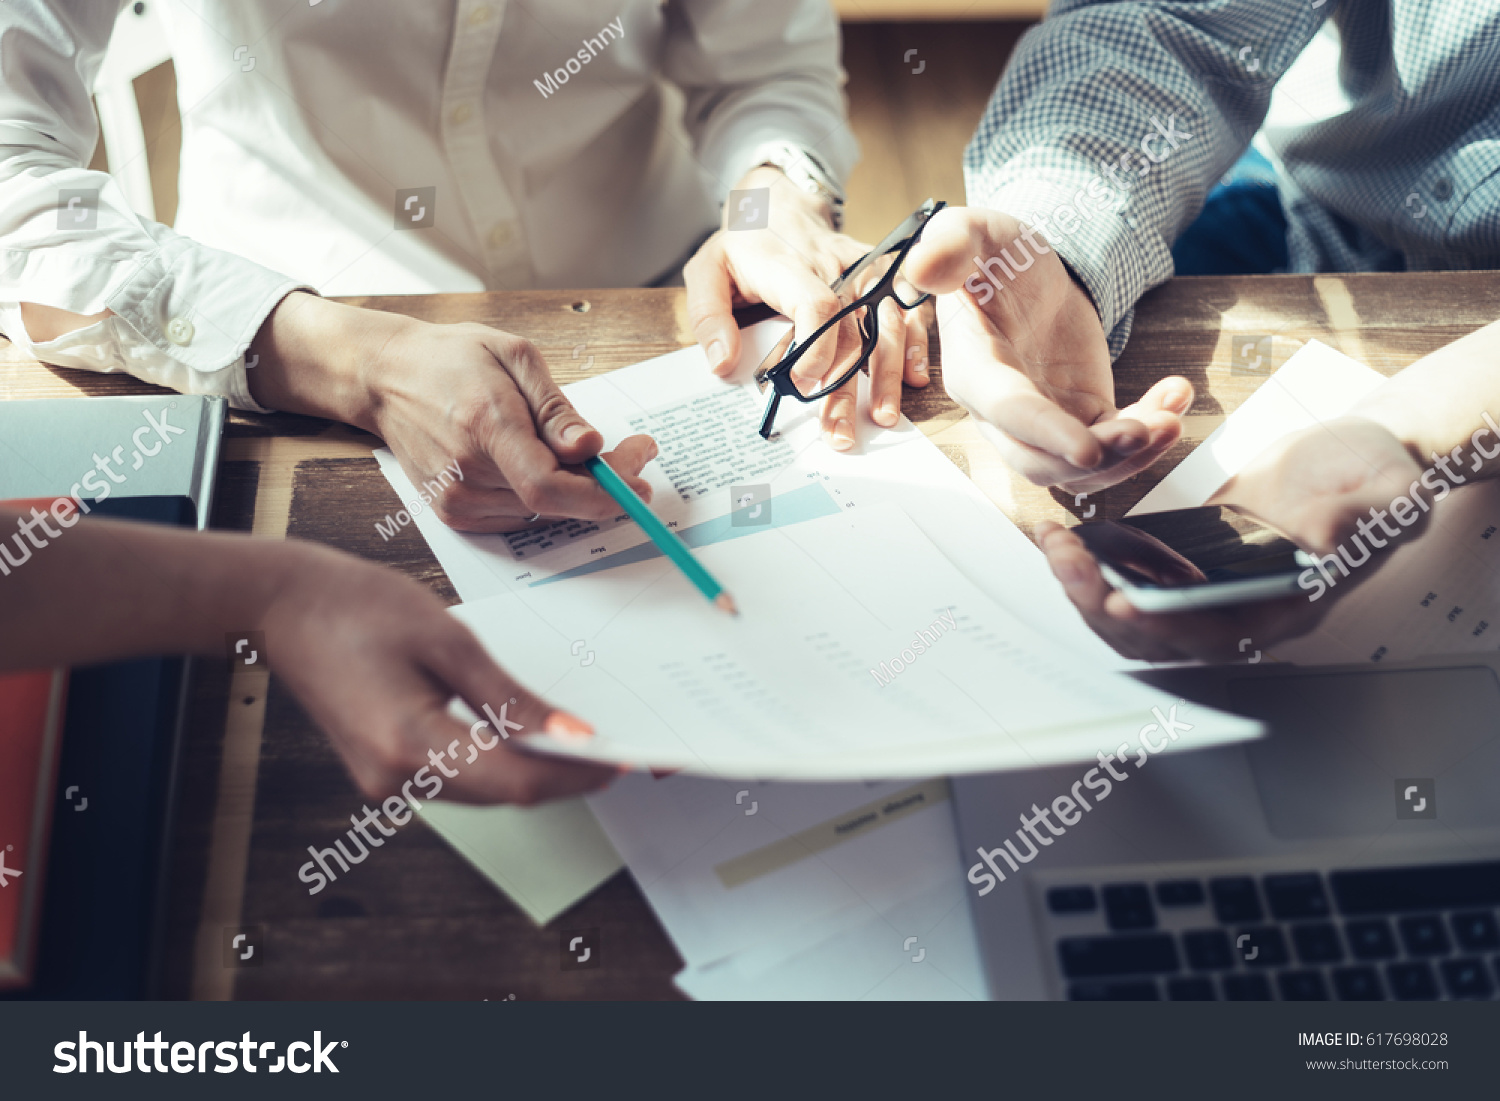 Business People Working Together Loft Office Stock Photo 617698028 |  Shutterstock